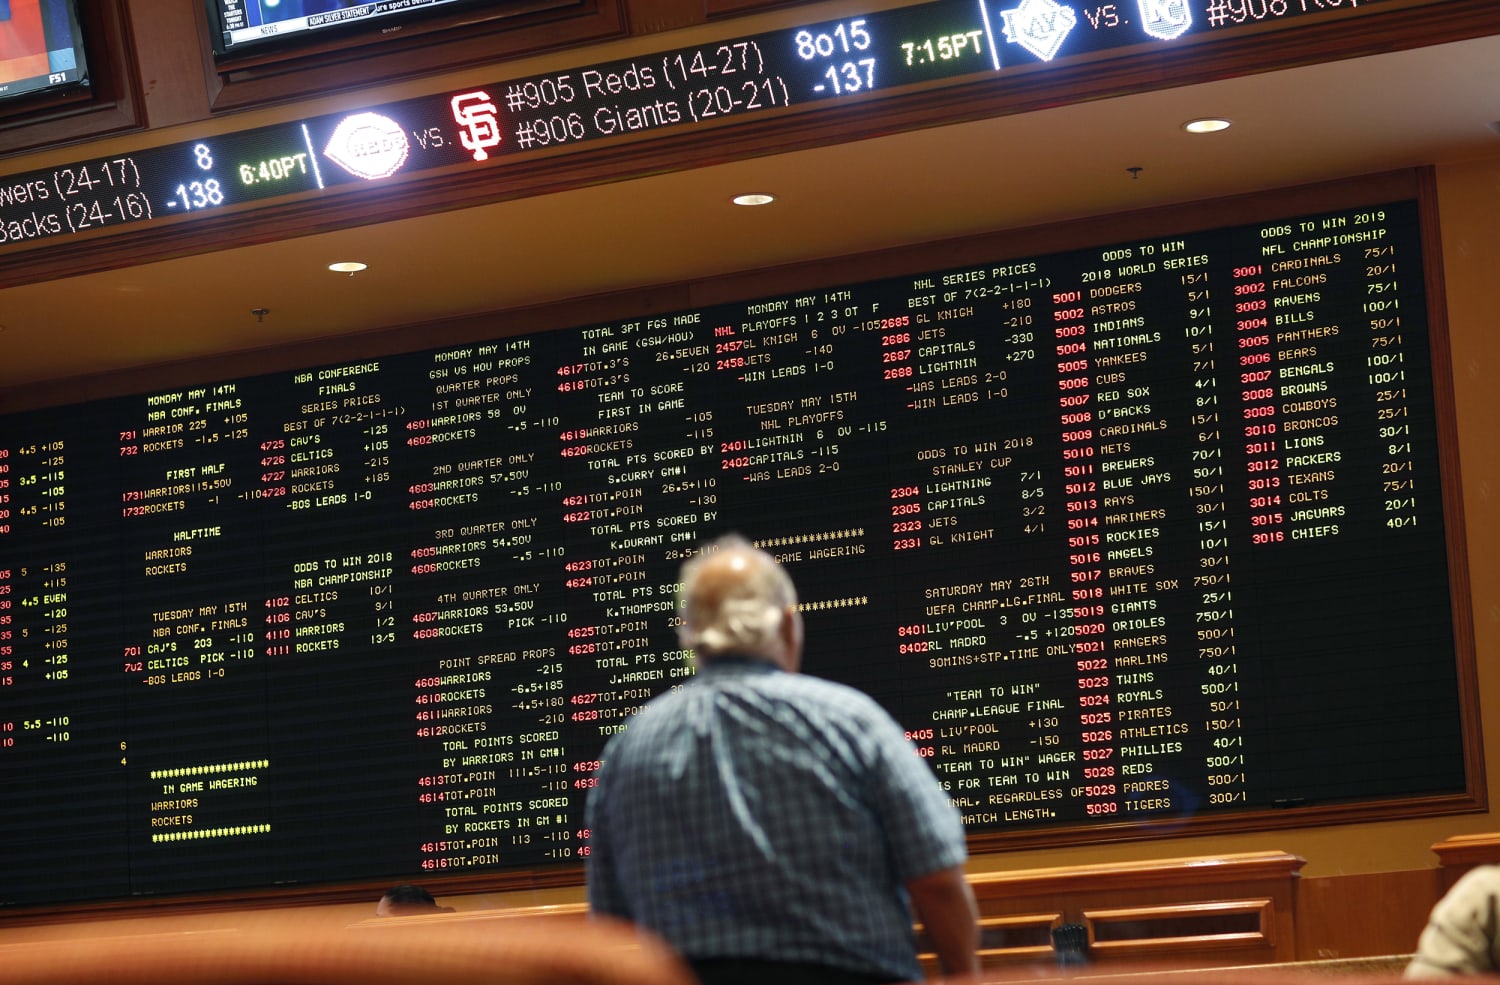 Legal Online Sports Betting